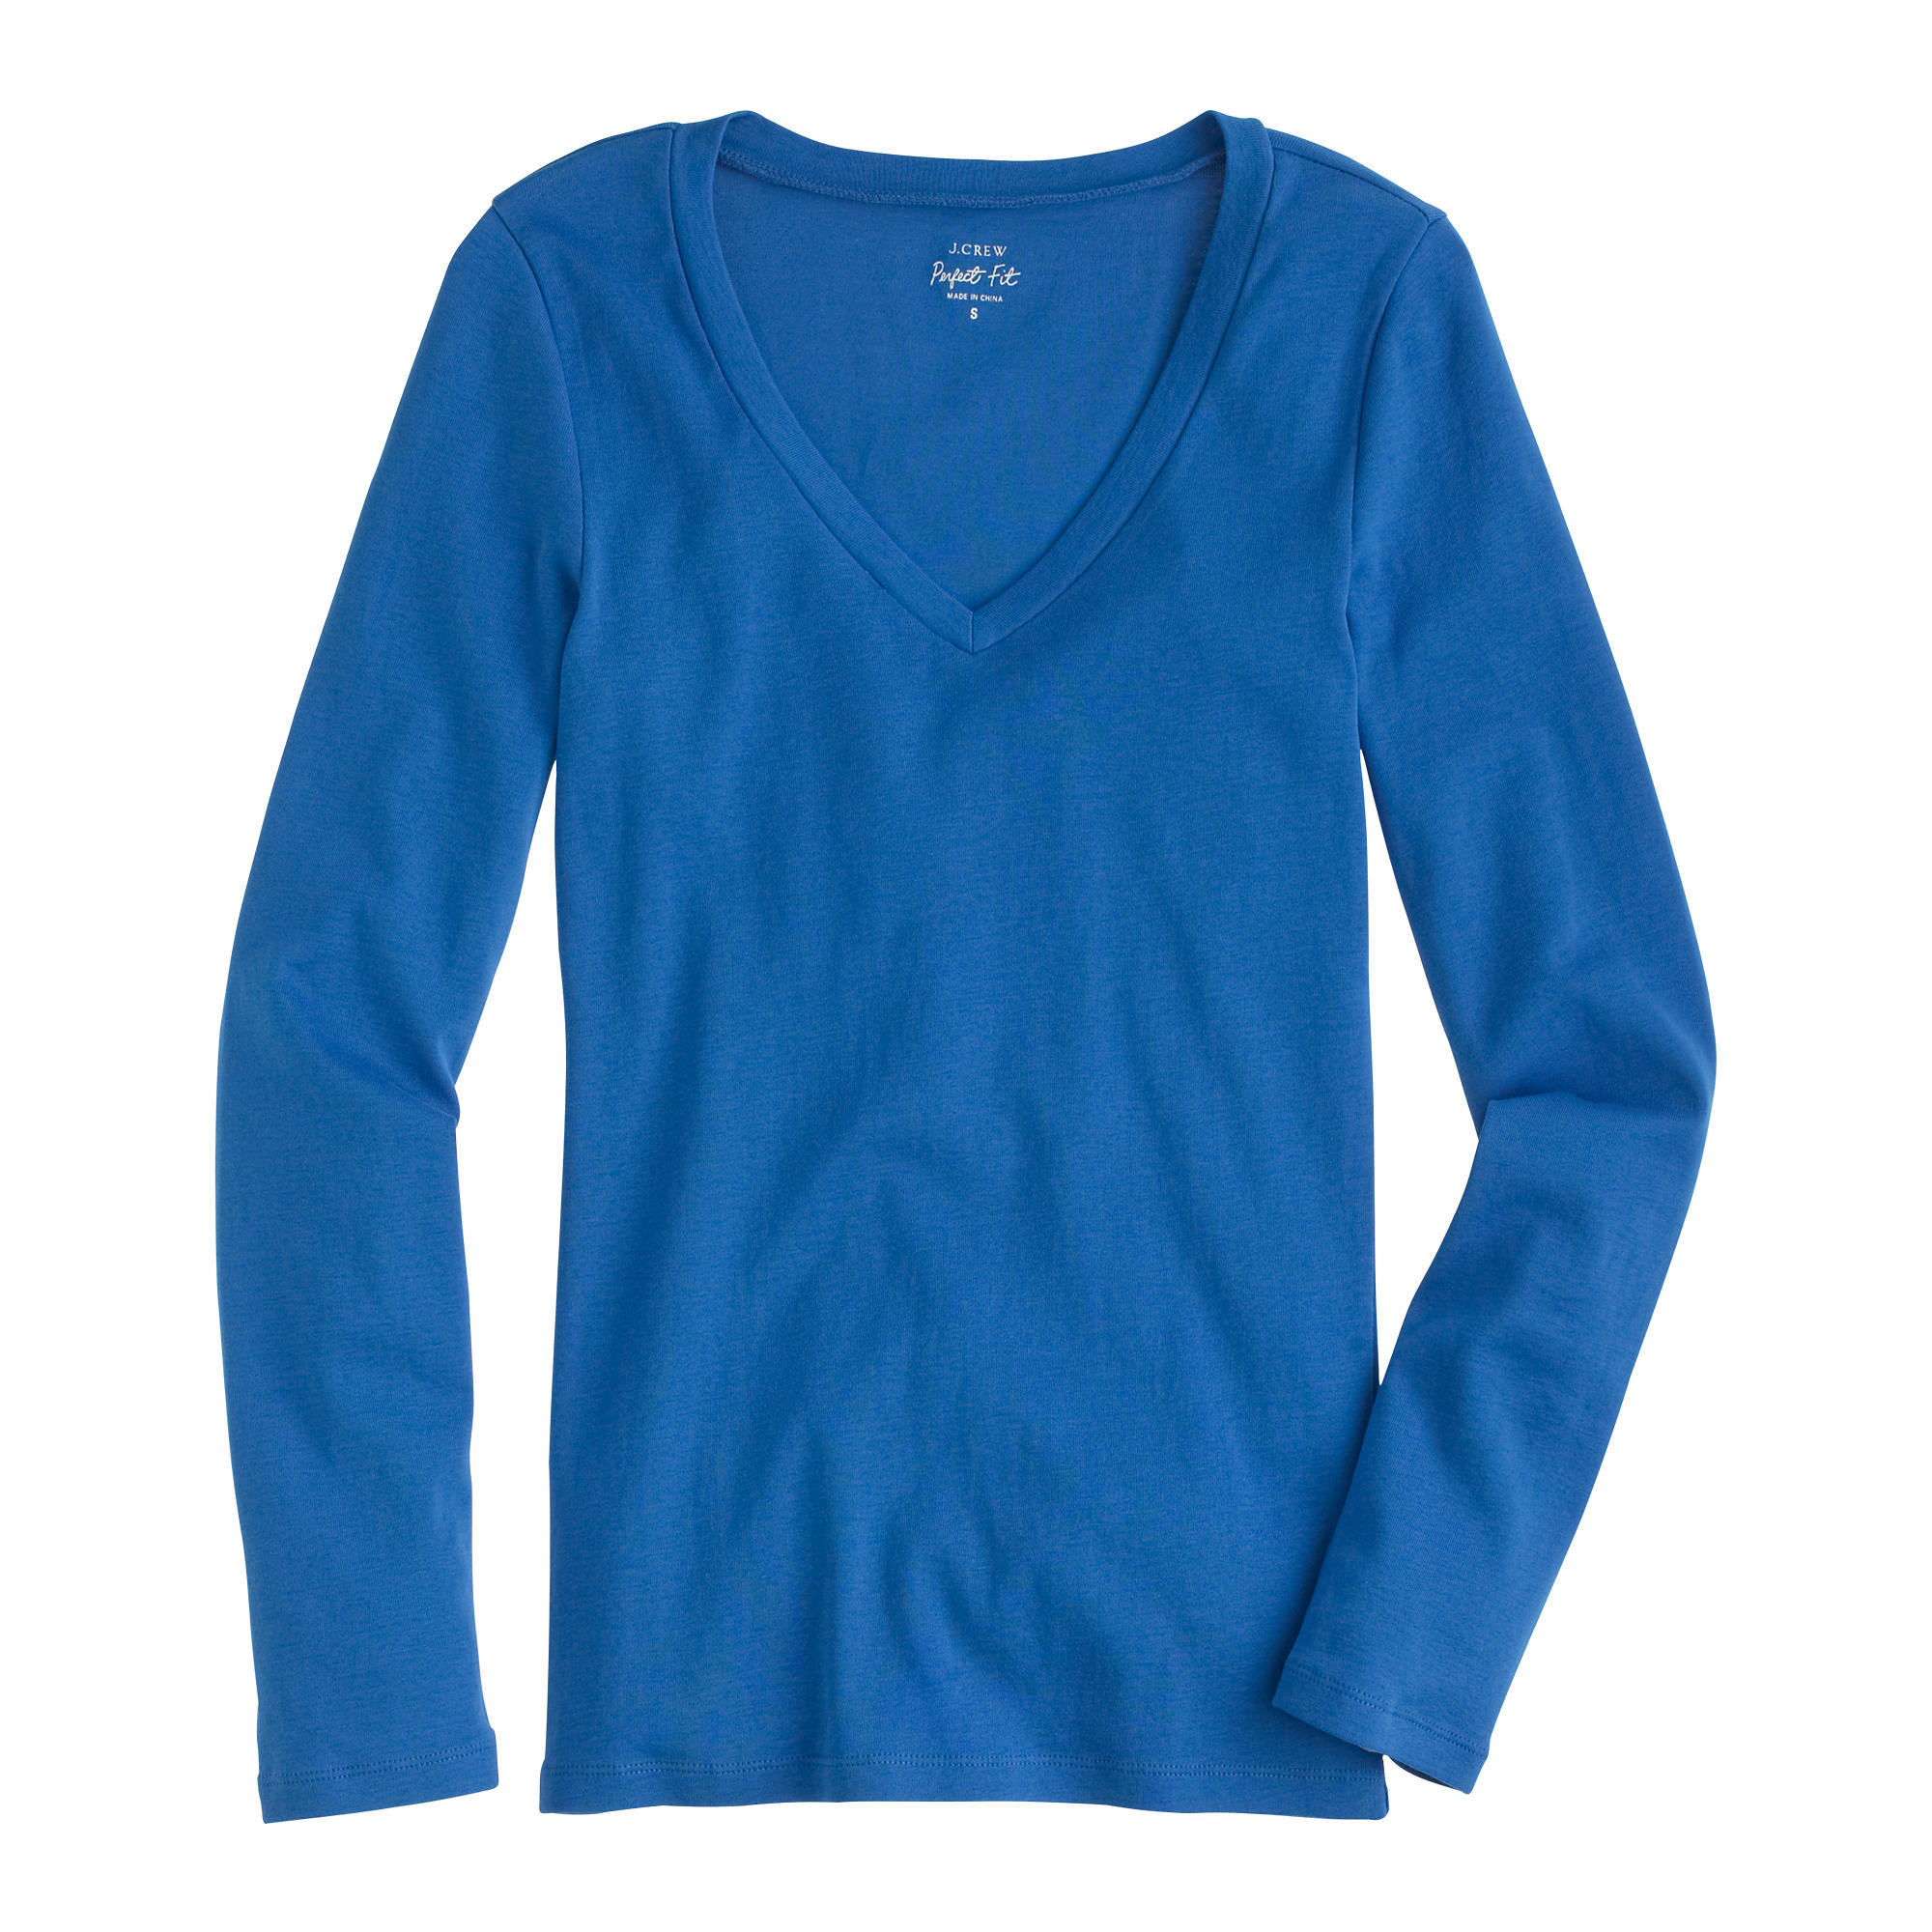 J.crew Perfect-fit Long-sleeve V-neck T-shirt in Blue | Lyst